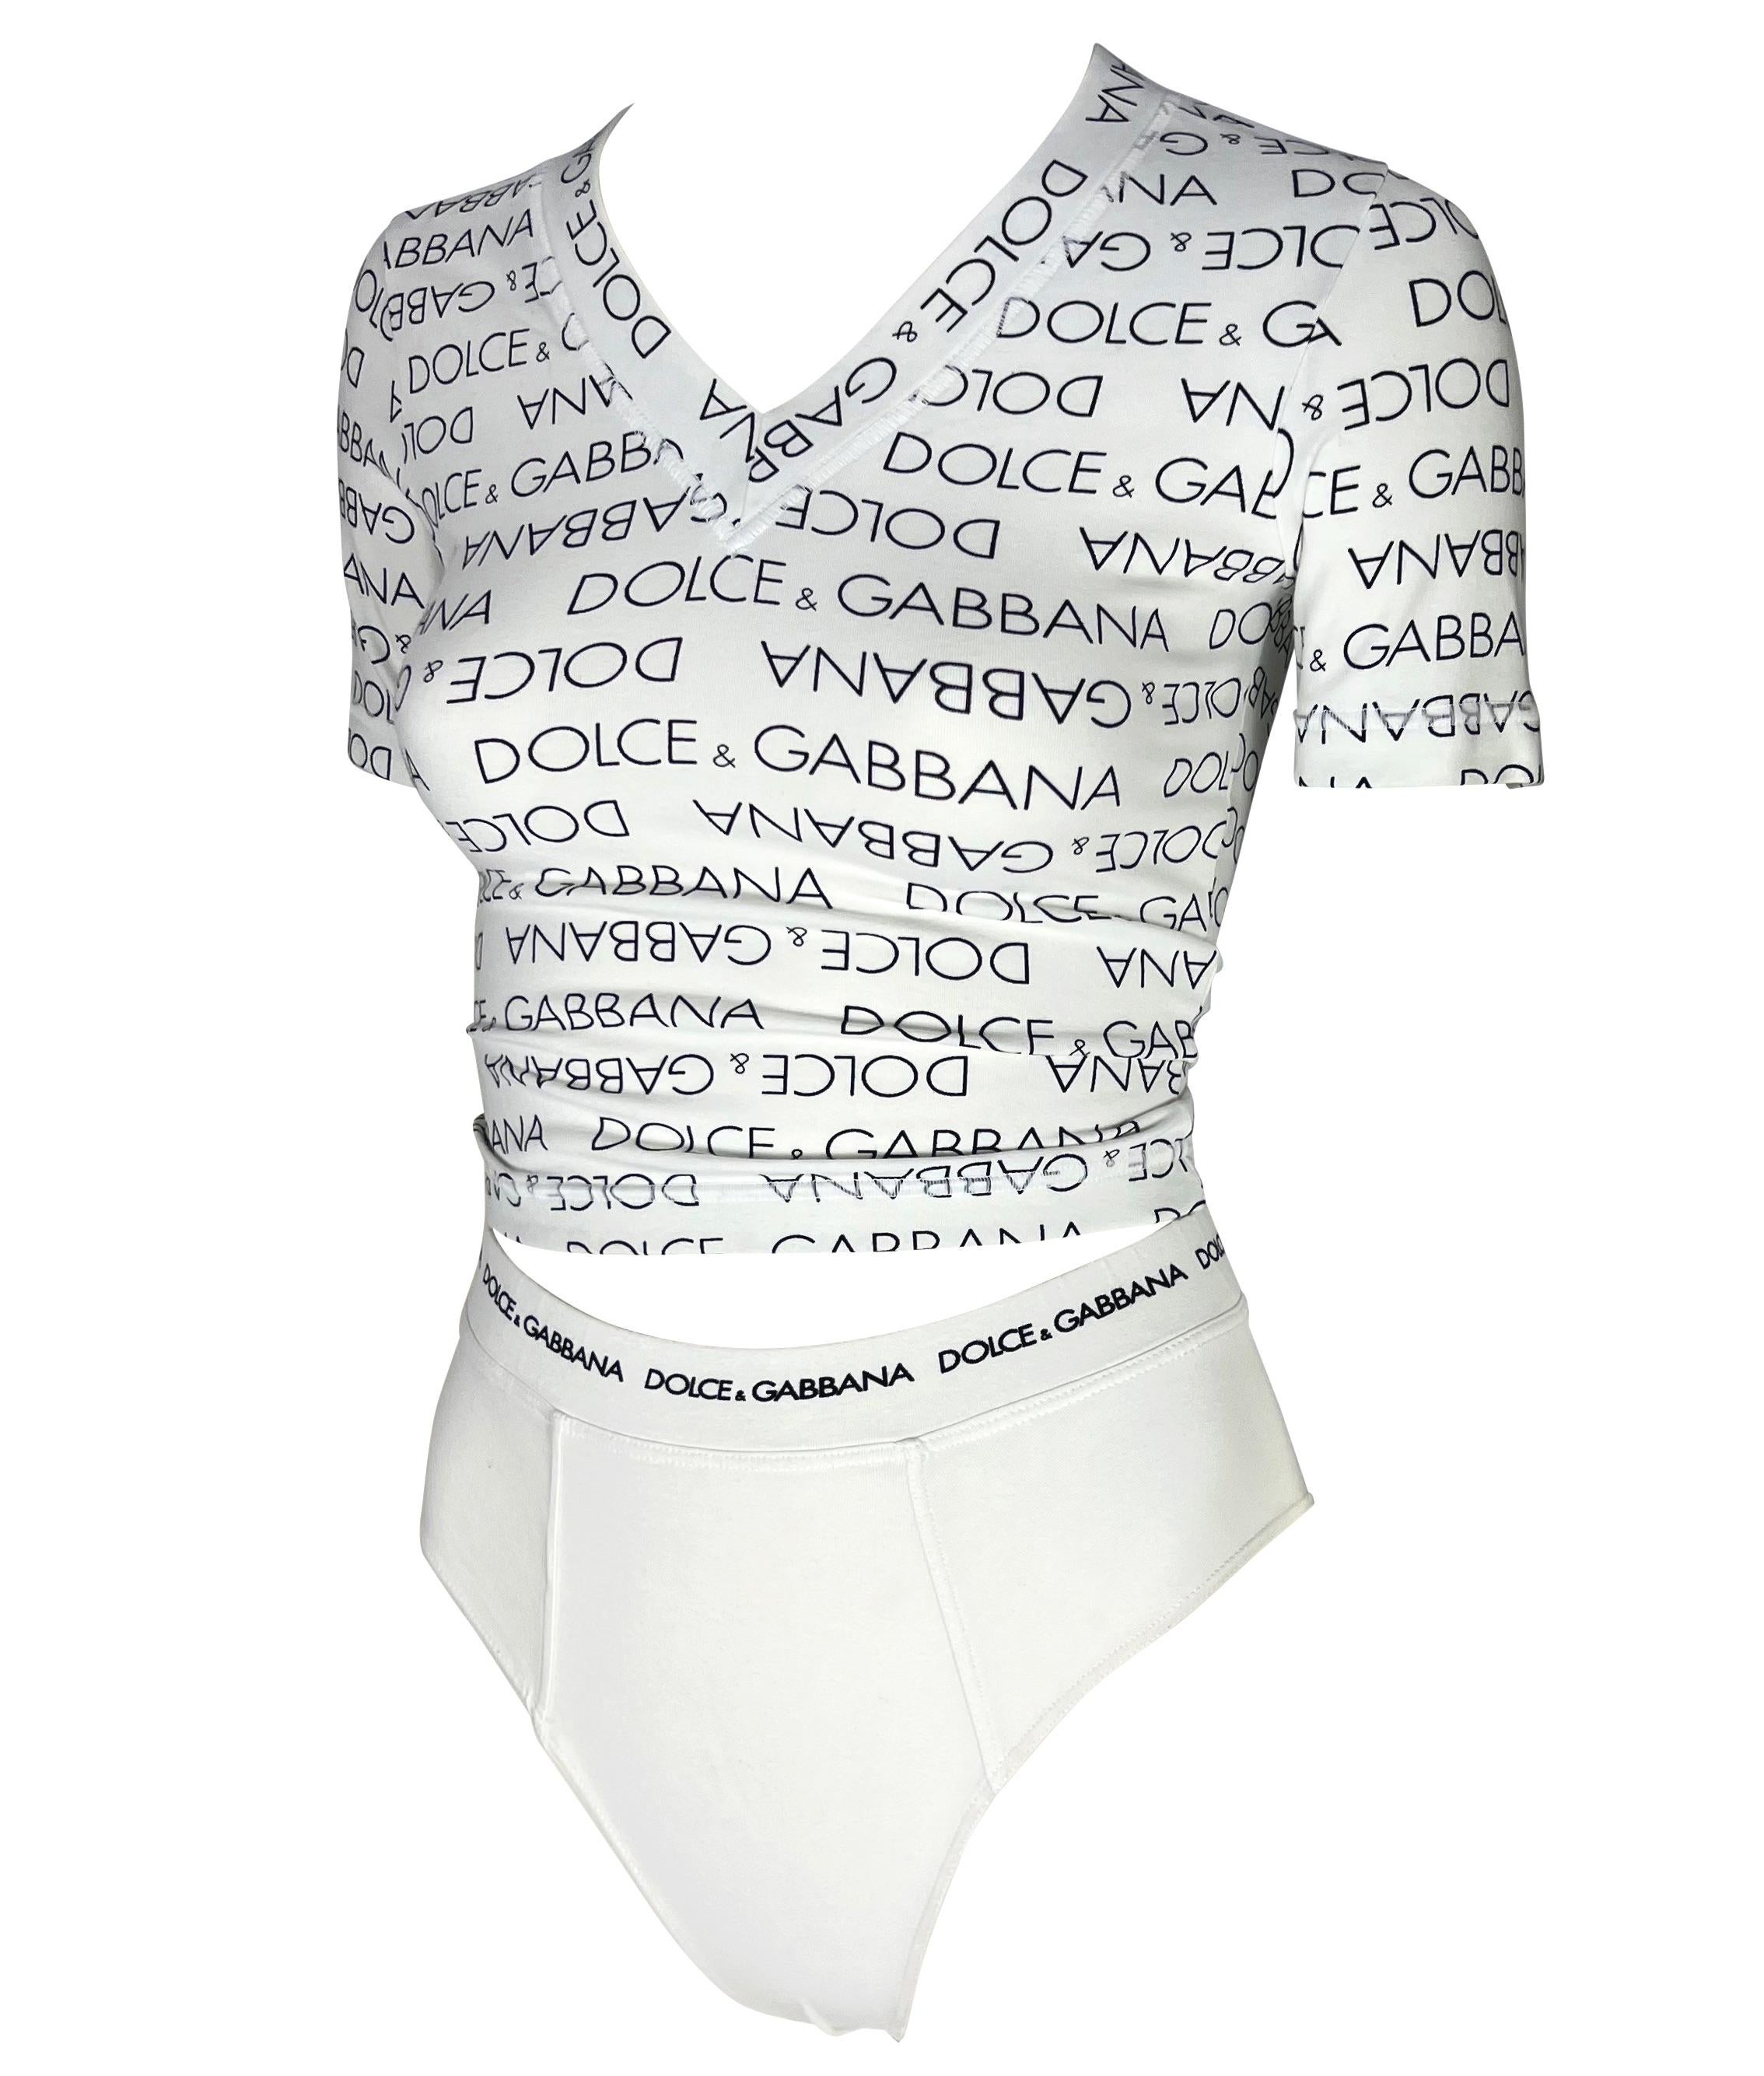 Presenting a rare lounge/lingerie set designed by Dolce & Gabbana for their Spring/Summer 1995 collection. This iconic logo print debuted on the season's runway and appeared in the season's ad campaign. Check out our storefront for more vintage